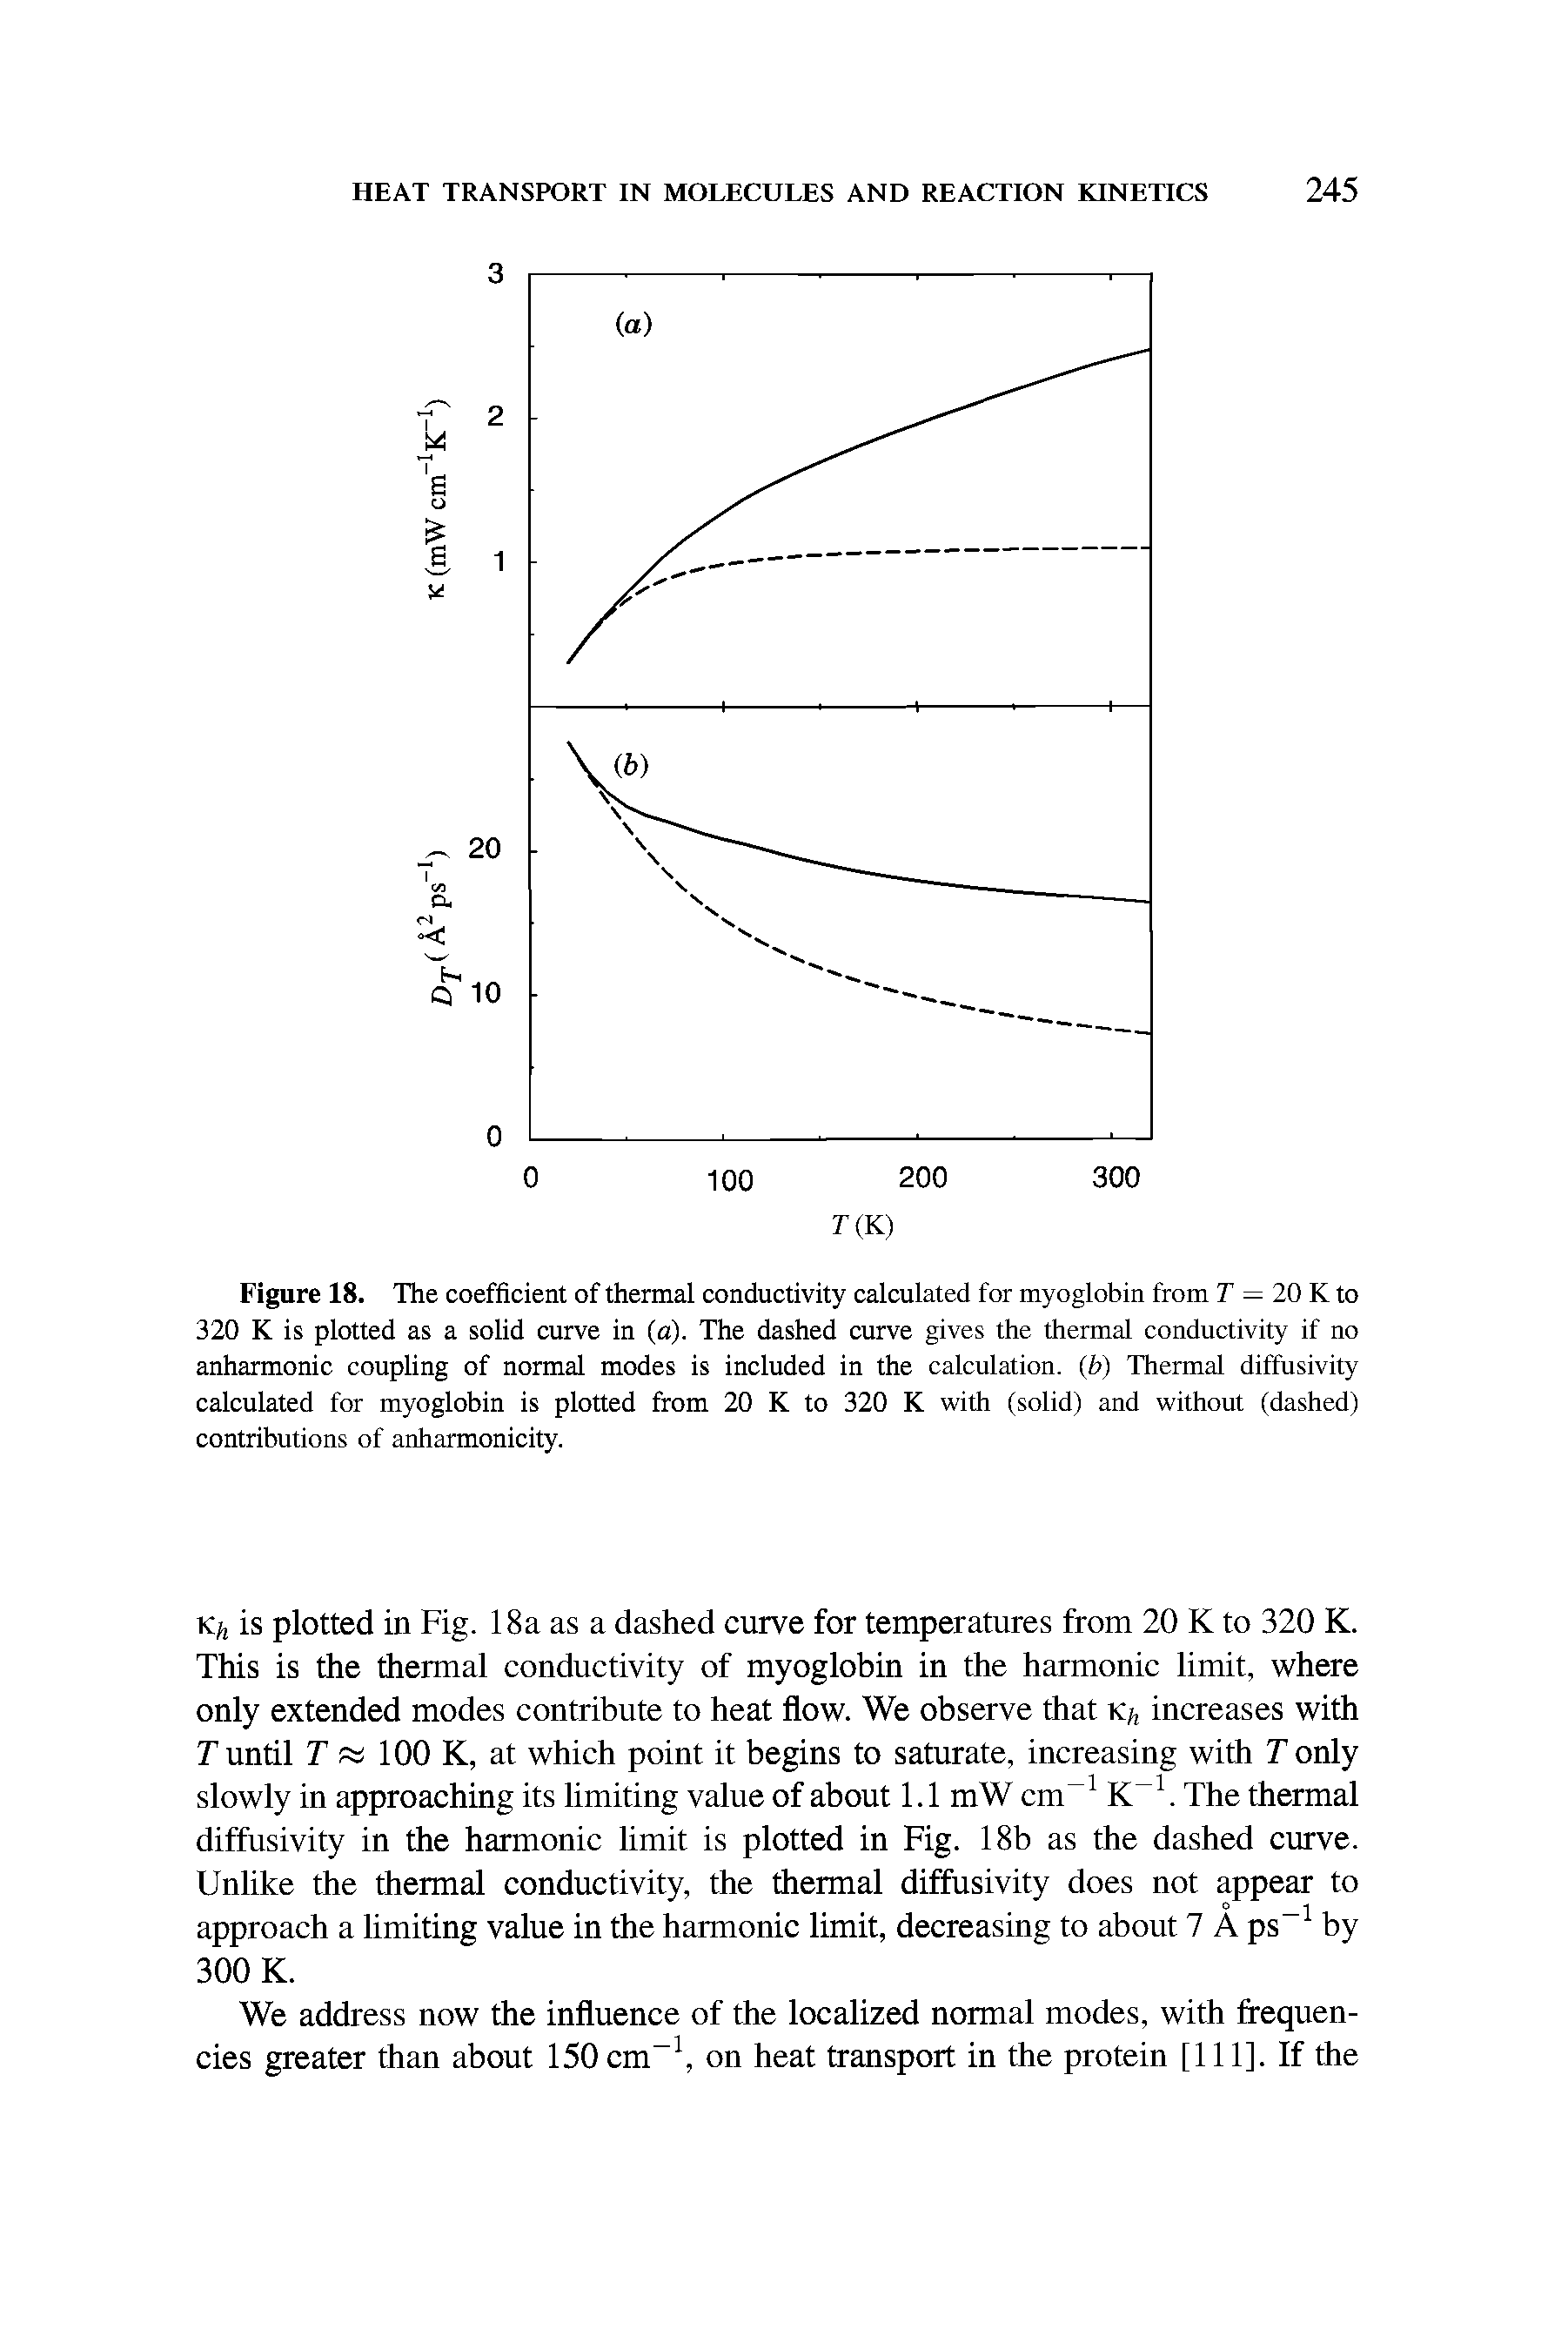 Figure 18. The coefficient of thermal conductivity calculated for myoglobin from T = 20 K to 320 K is plotted as a solid curve in (a). The dashed curve gives the thermal conductivity if no anharmonic coupling of normal modes is included in the calculation, (b) Thermal diffusivity calculated for myoglobin is plotted from 20 K to 320 K with (solid) and without (dashed) contributions of anharmonicity.